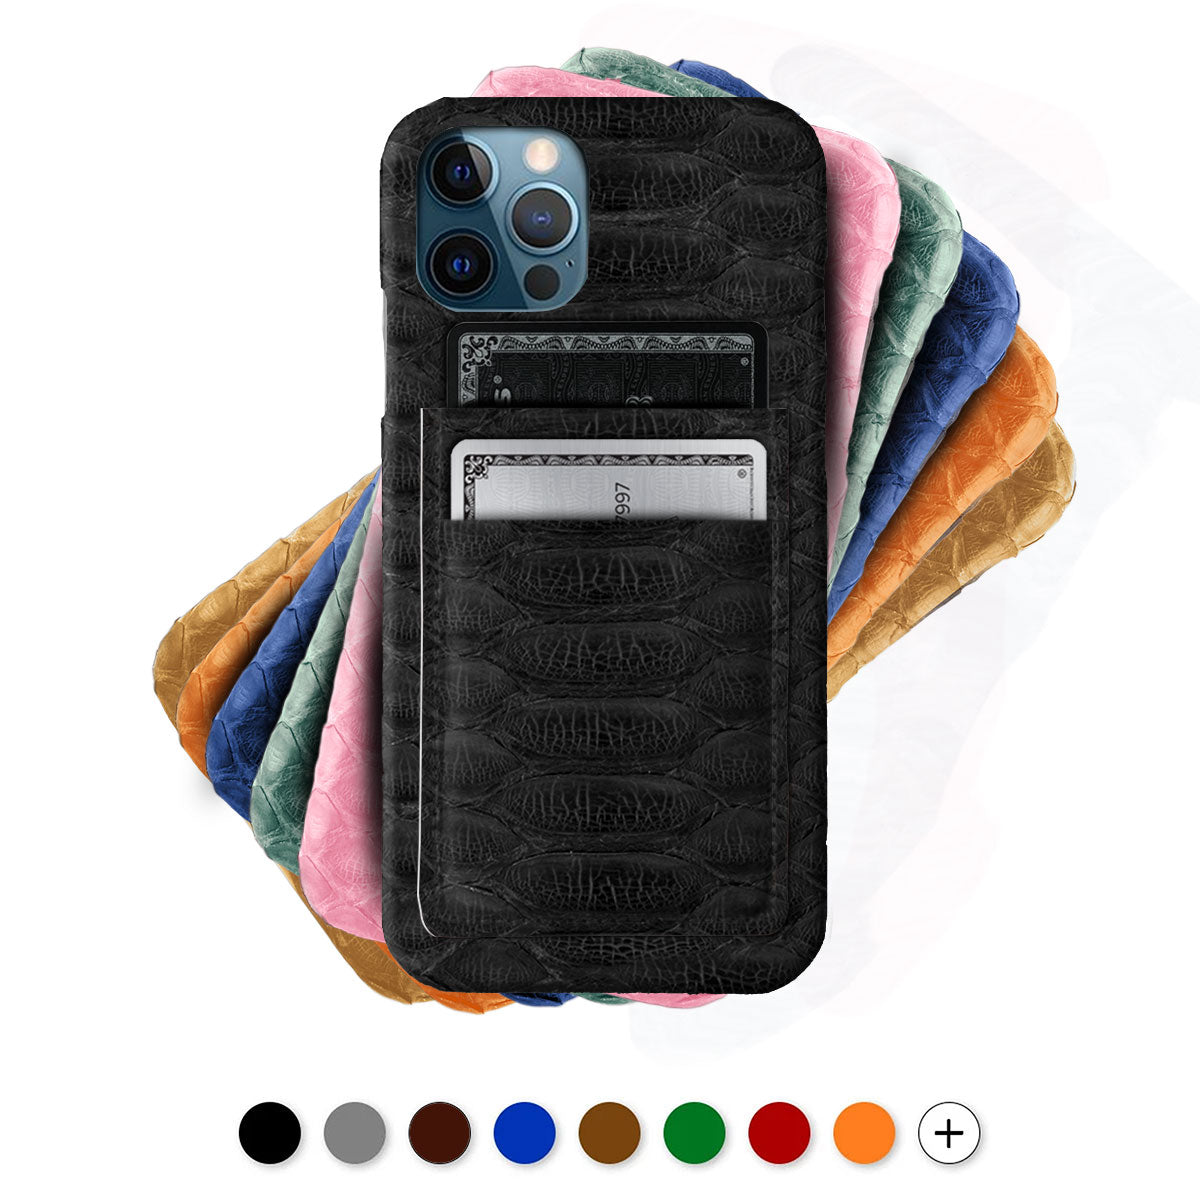 Leather iPhone " Double card case " / cover with credit card Pocket - iPhone 12 & 11 ( Pro / Max / Mini )  - Genuine Python